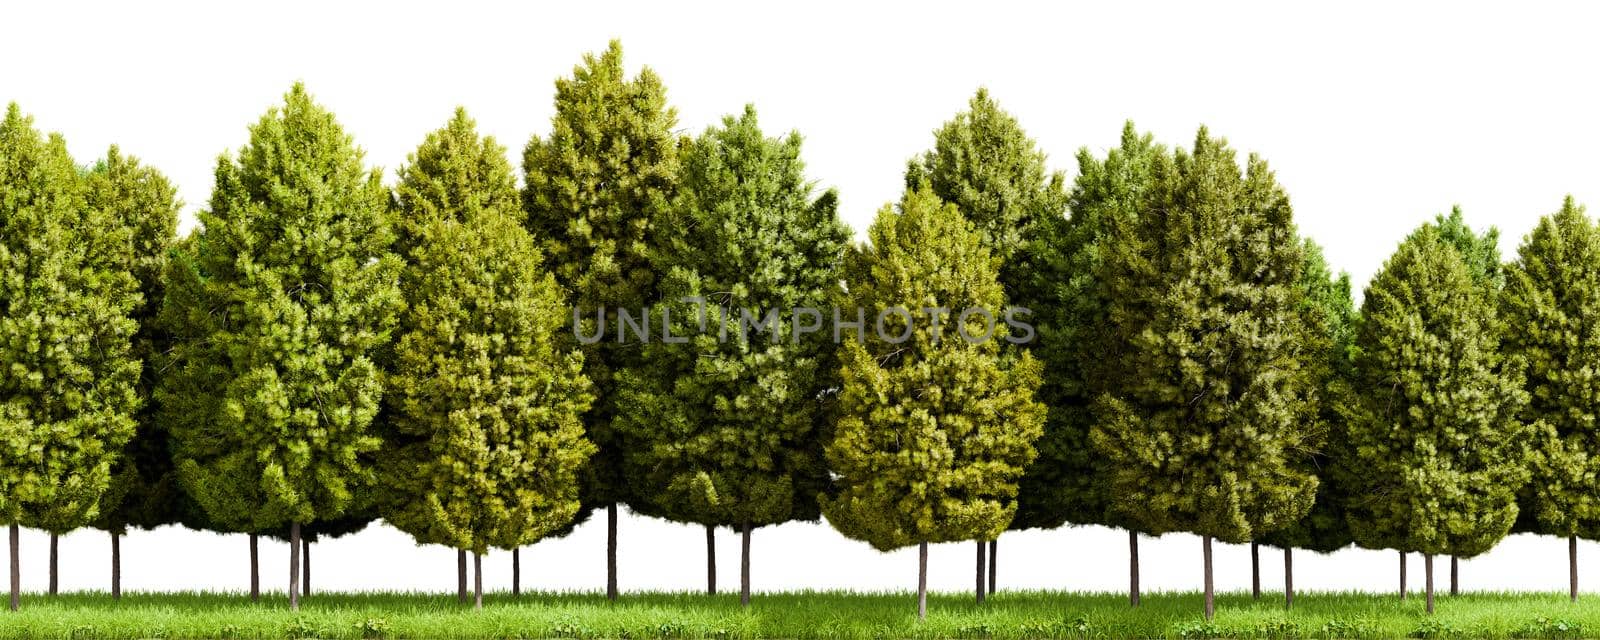 Row of trees isolated on white background. 3D rendering illustration.